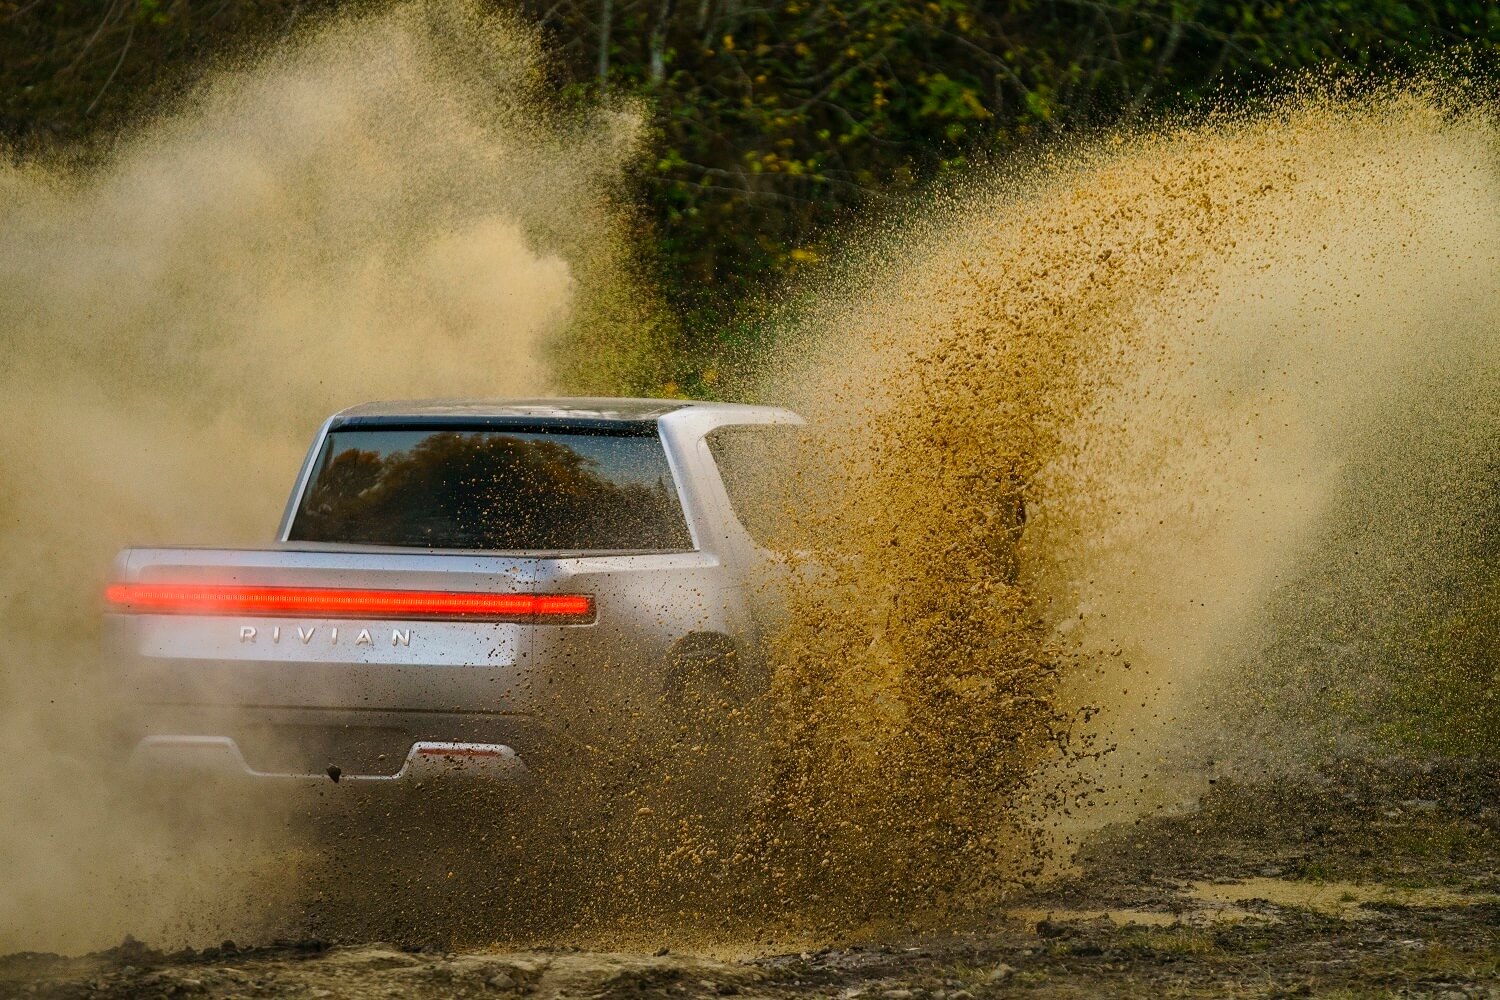 A Rivian R1T electric truck racing across a dirt road, dust visible in the foreground.